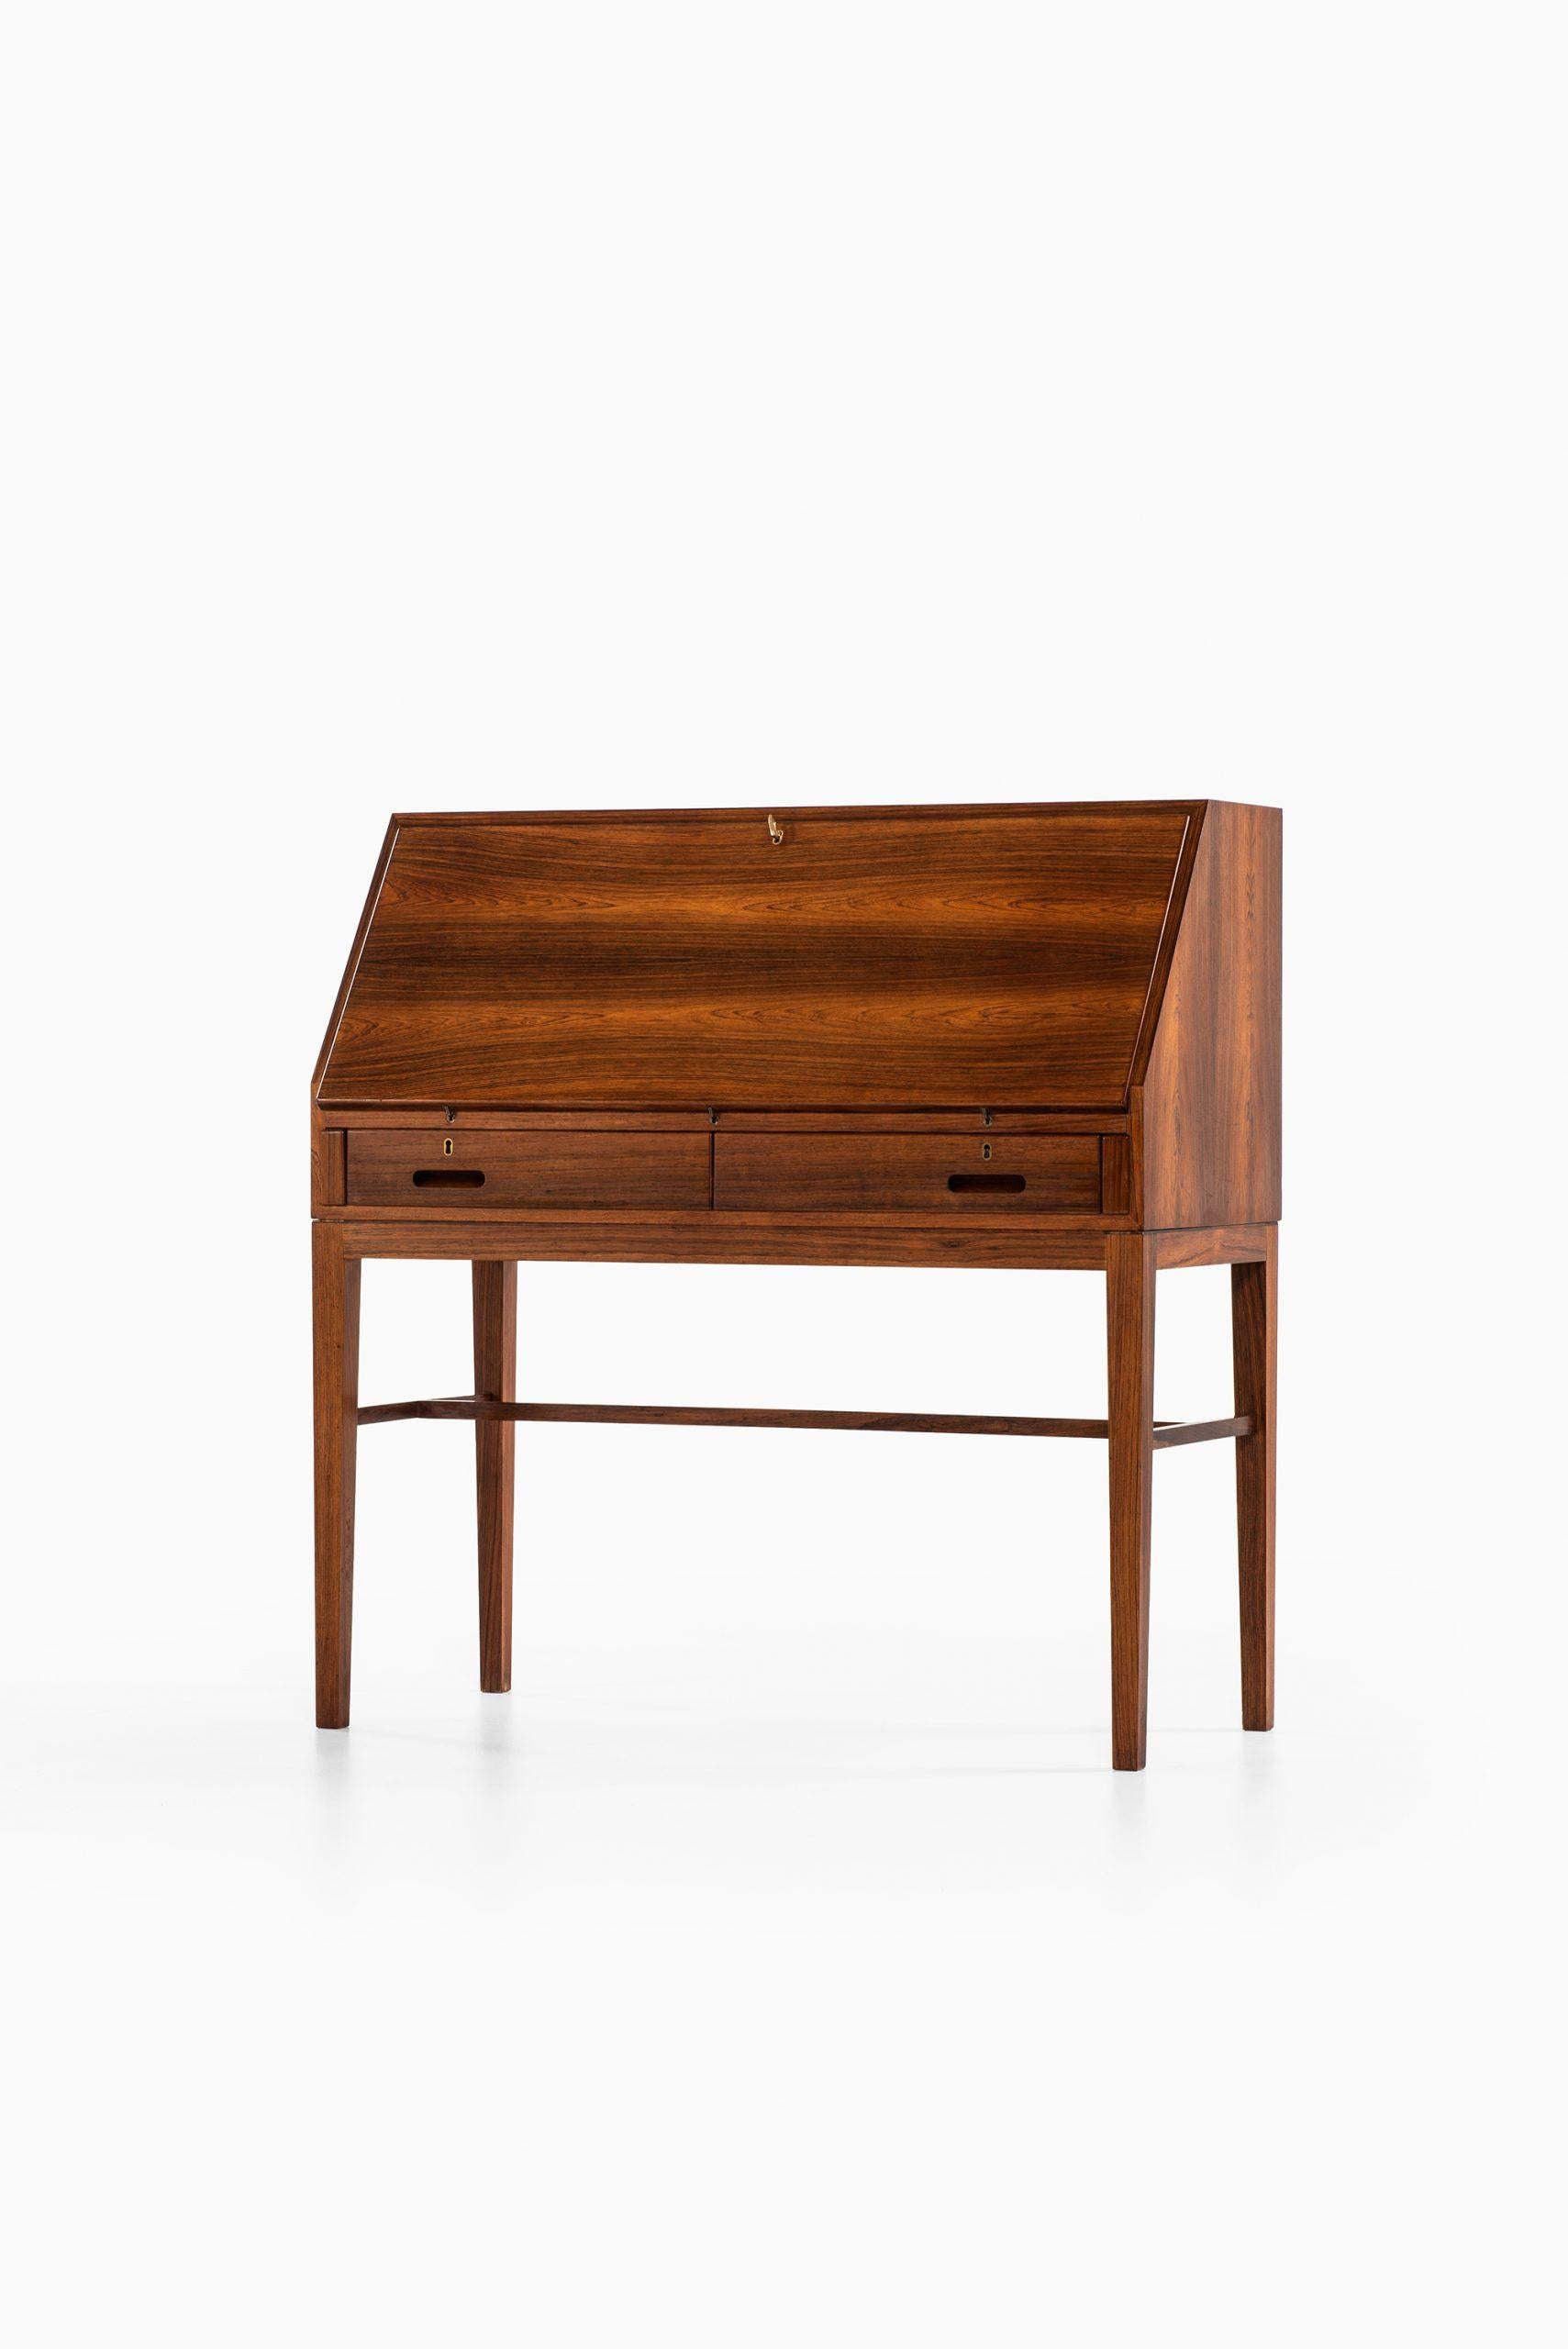 Very rare bureau / secretaire designed by Kai Winding. Produced by cabinetmaker P. Jeppesen in Denmark.
Dimensions (W x D x H): 100 x 46.5 (83) x 104 (68) cm.